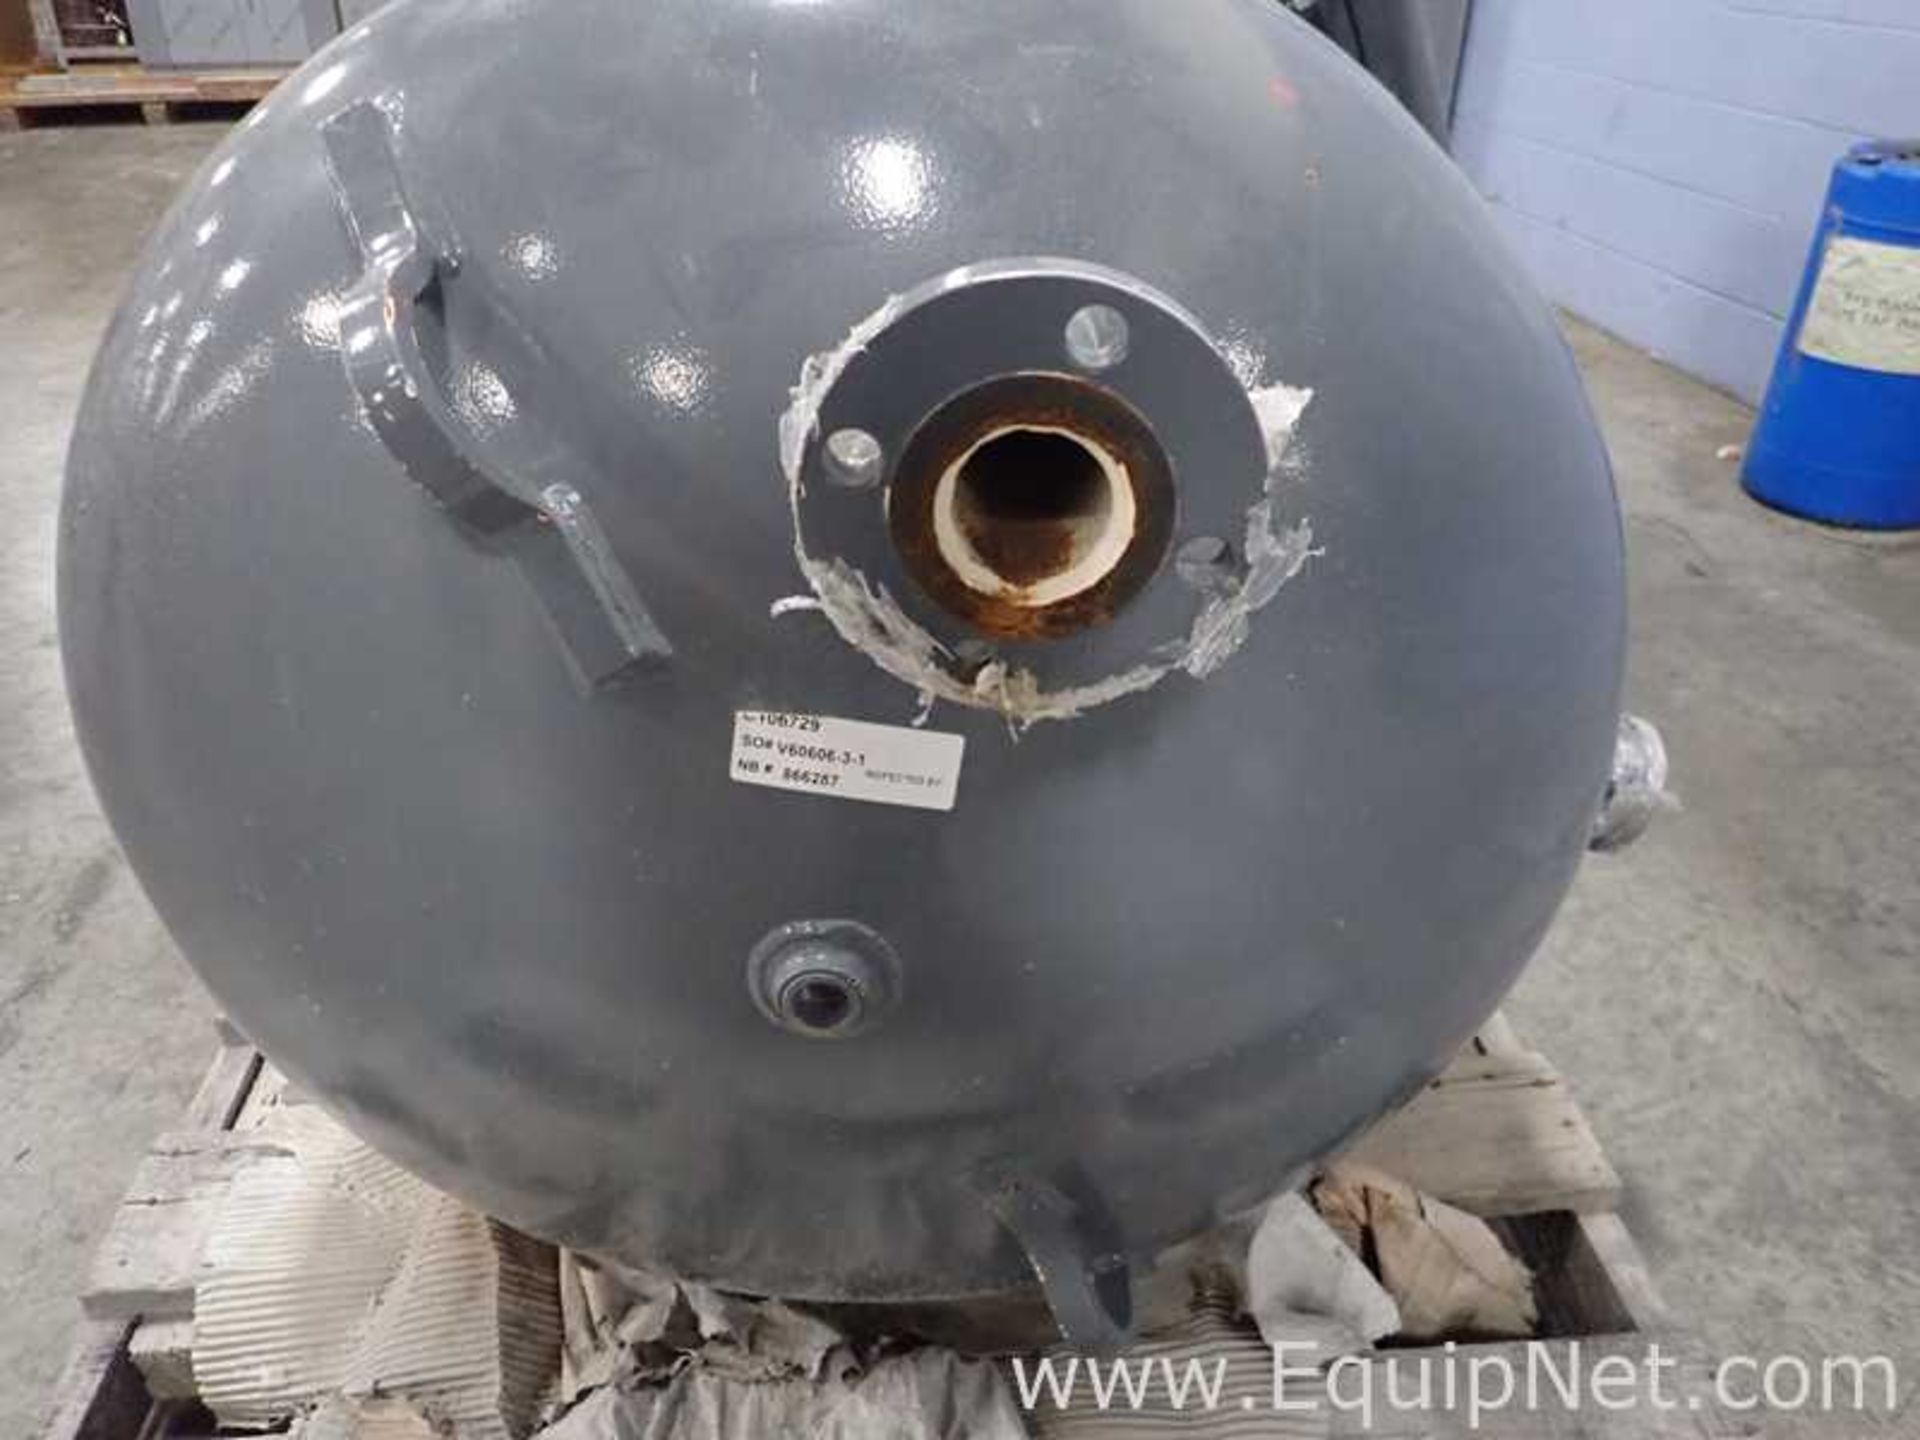 EQUIPNET LISTING #765750; REMOVAL COST: $40; DESCRIPTION: Steel Fab Carbon Steel Receiving Tank - Image 3 of 8